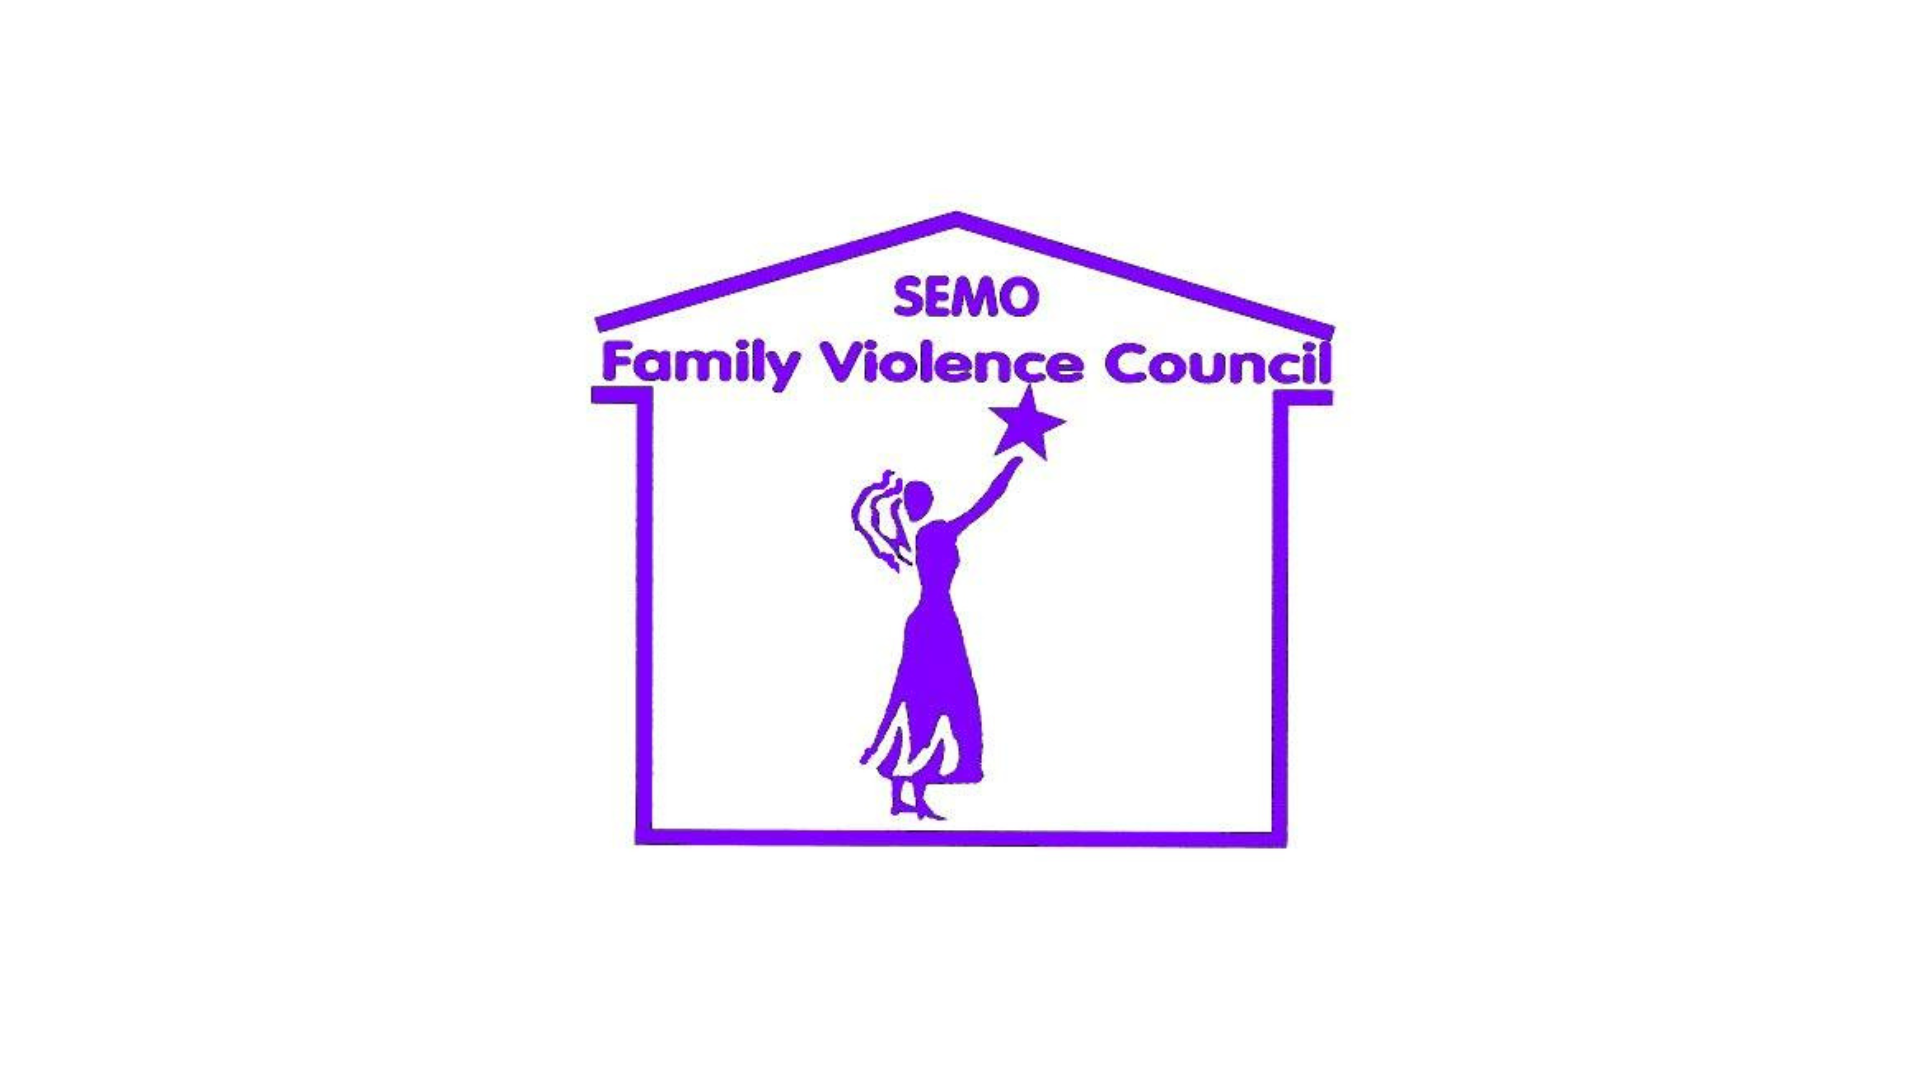 Donations for SEMO Family Violence Council